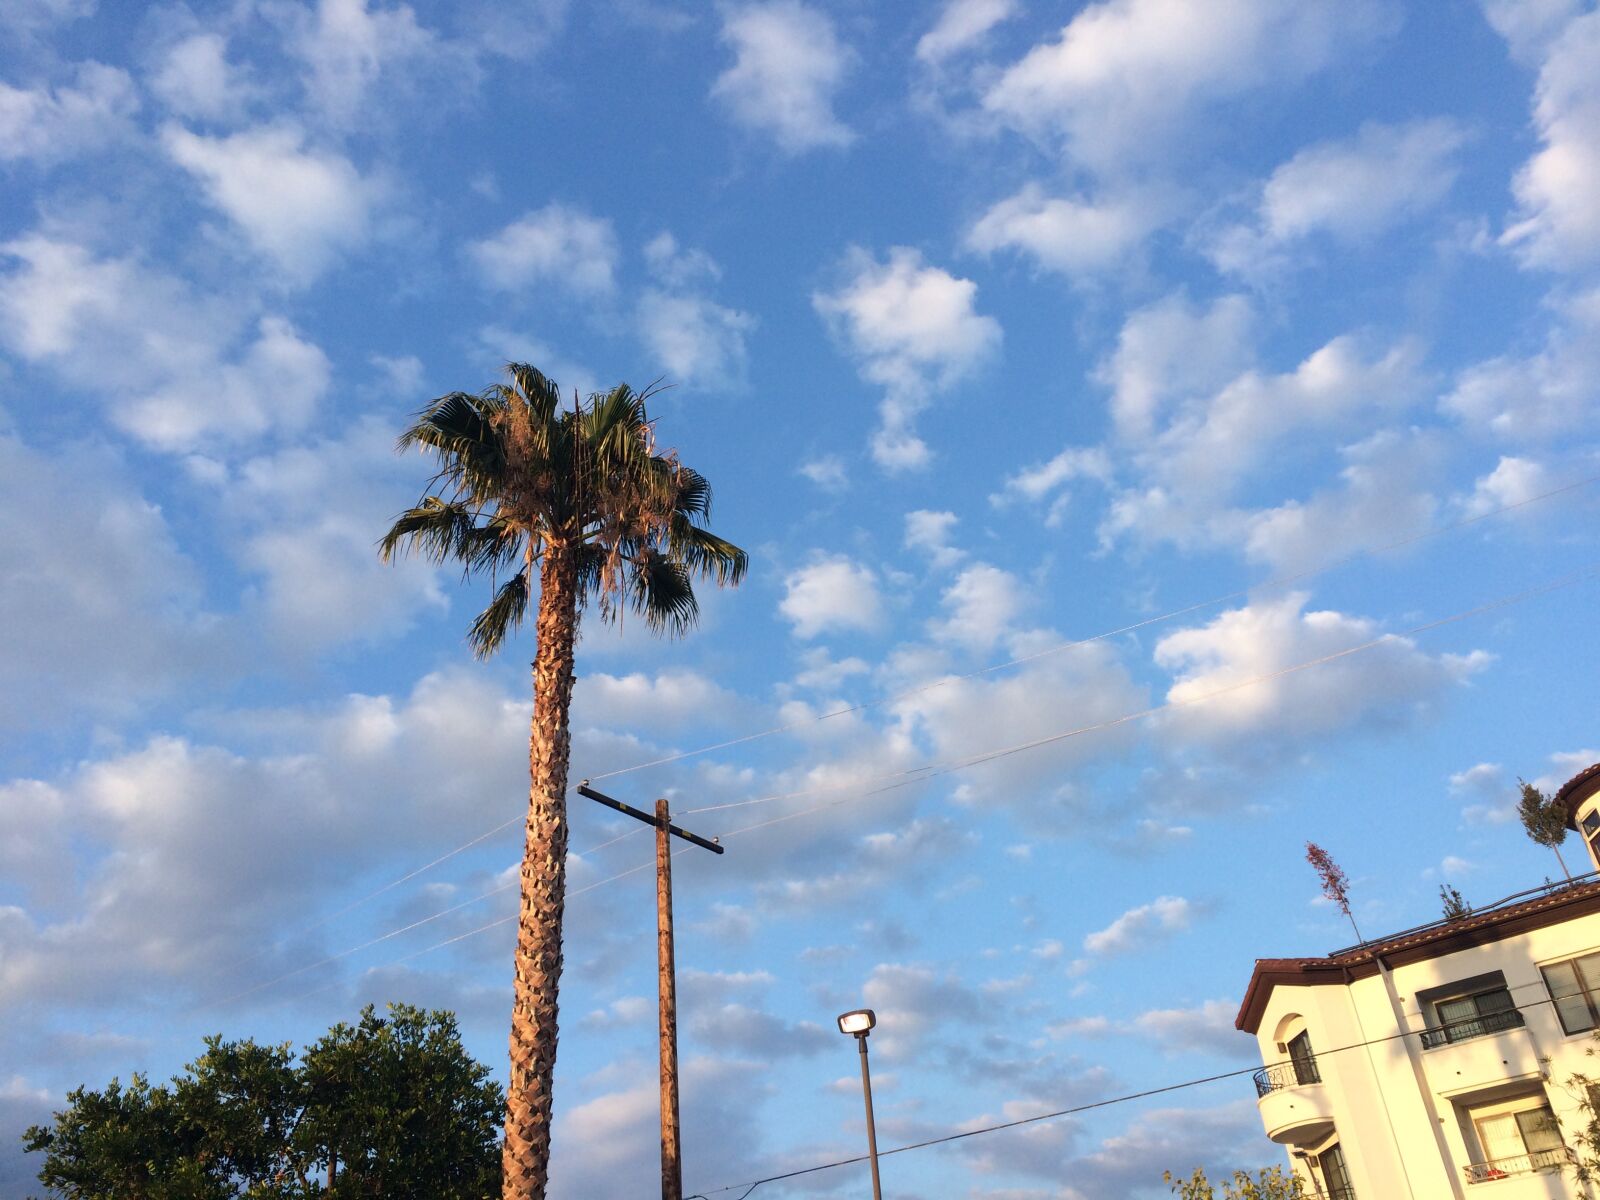 iPhone 5s back camera 4.15mm f/2.2 sample photo. Clouds, palm trees, sky photography